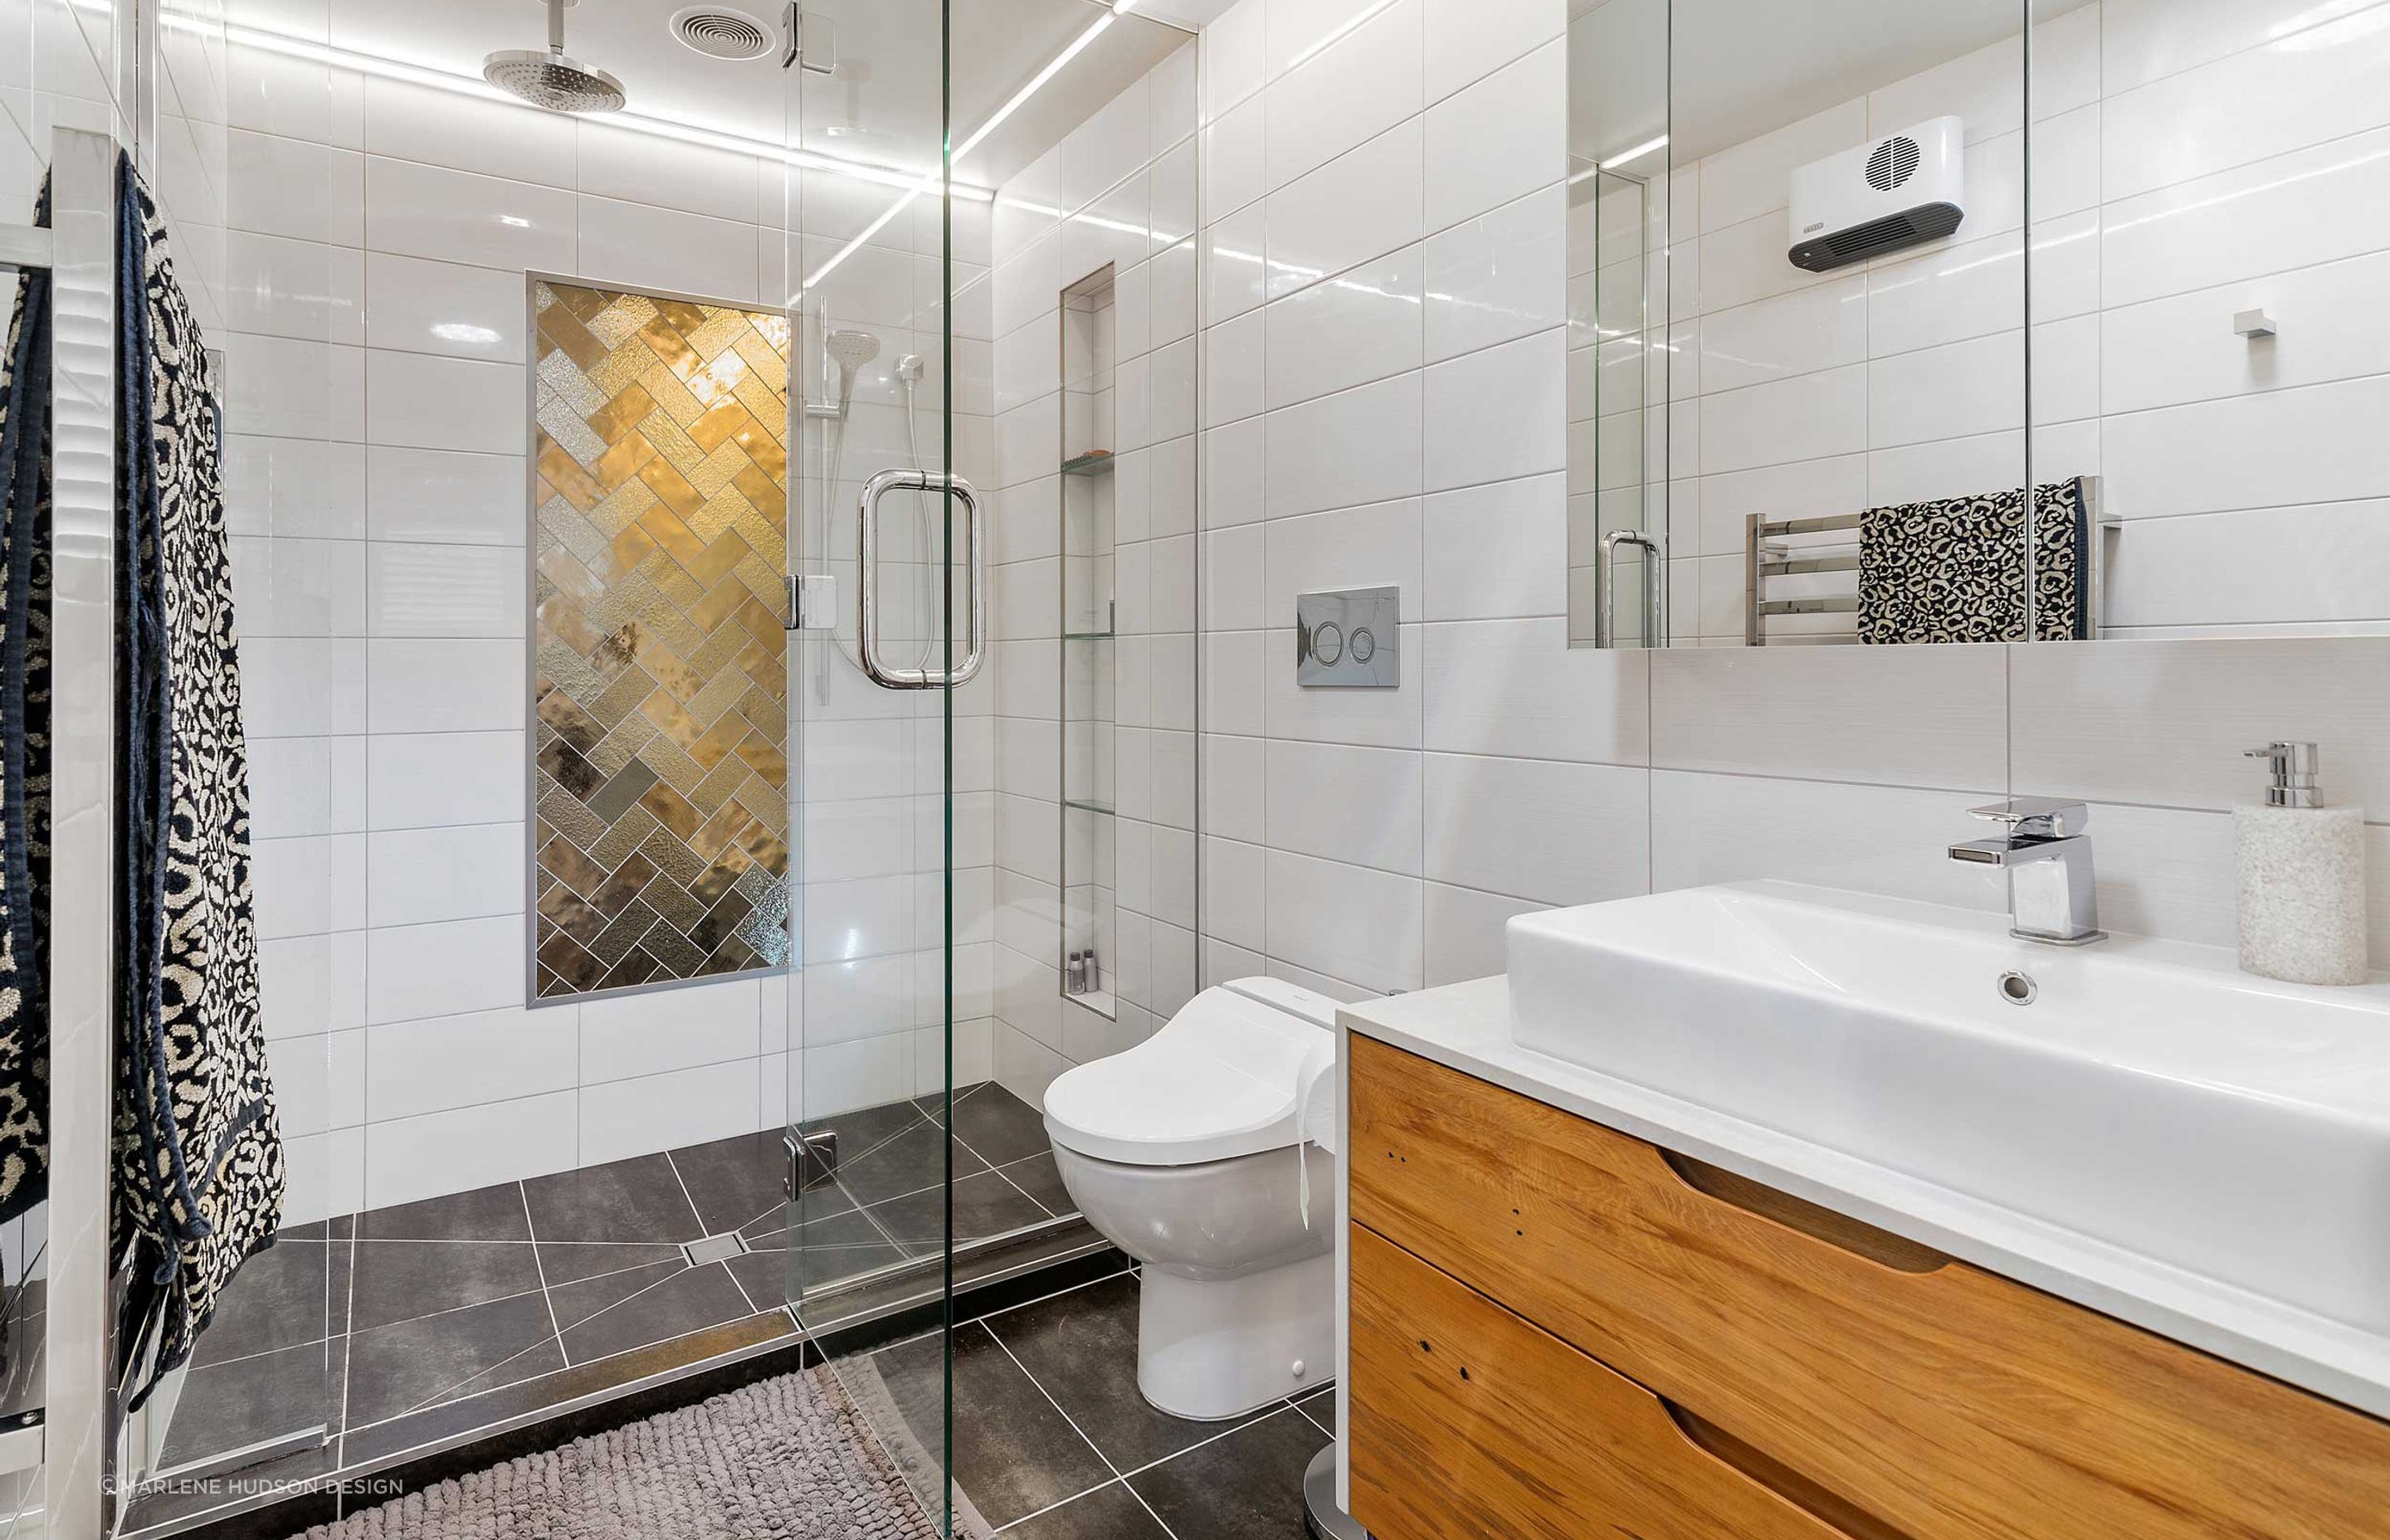 Bronze glass tiles bringing an artistic element to this Lynmore bathroom.